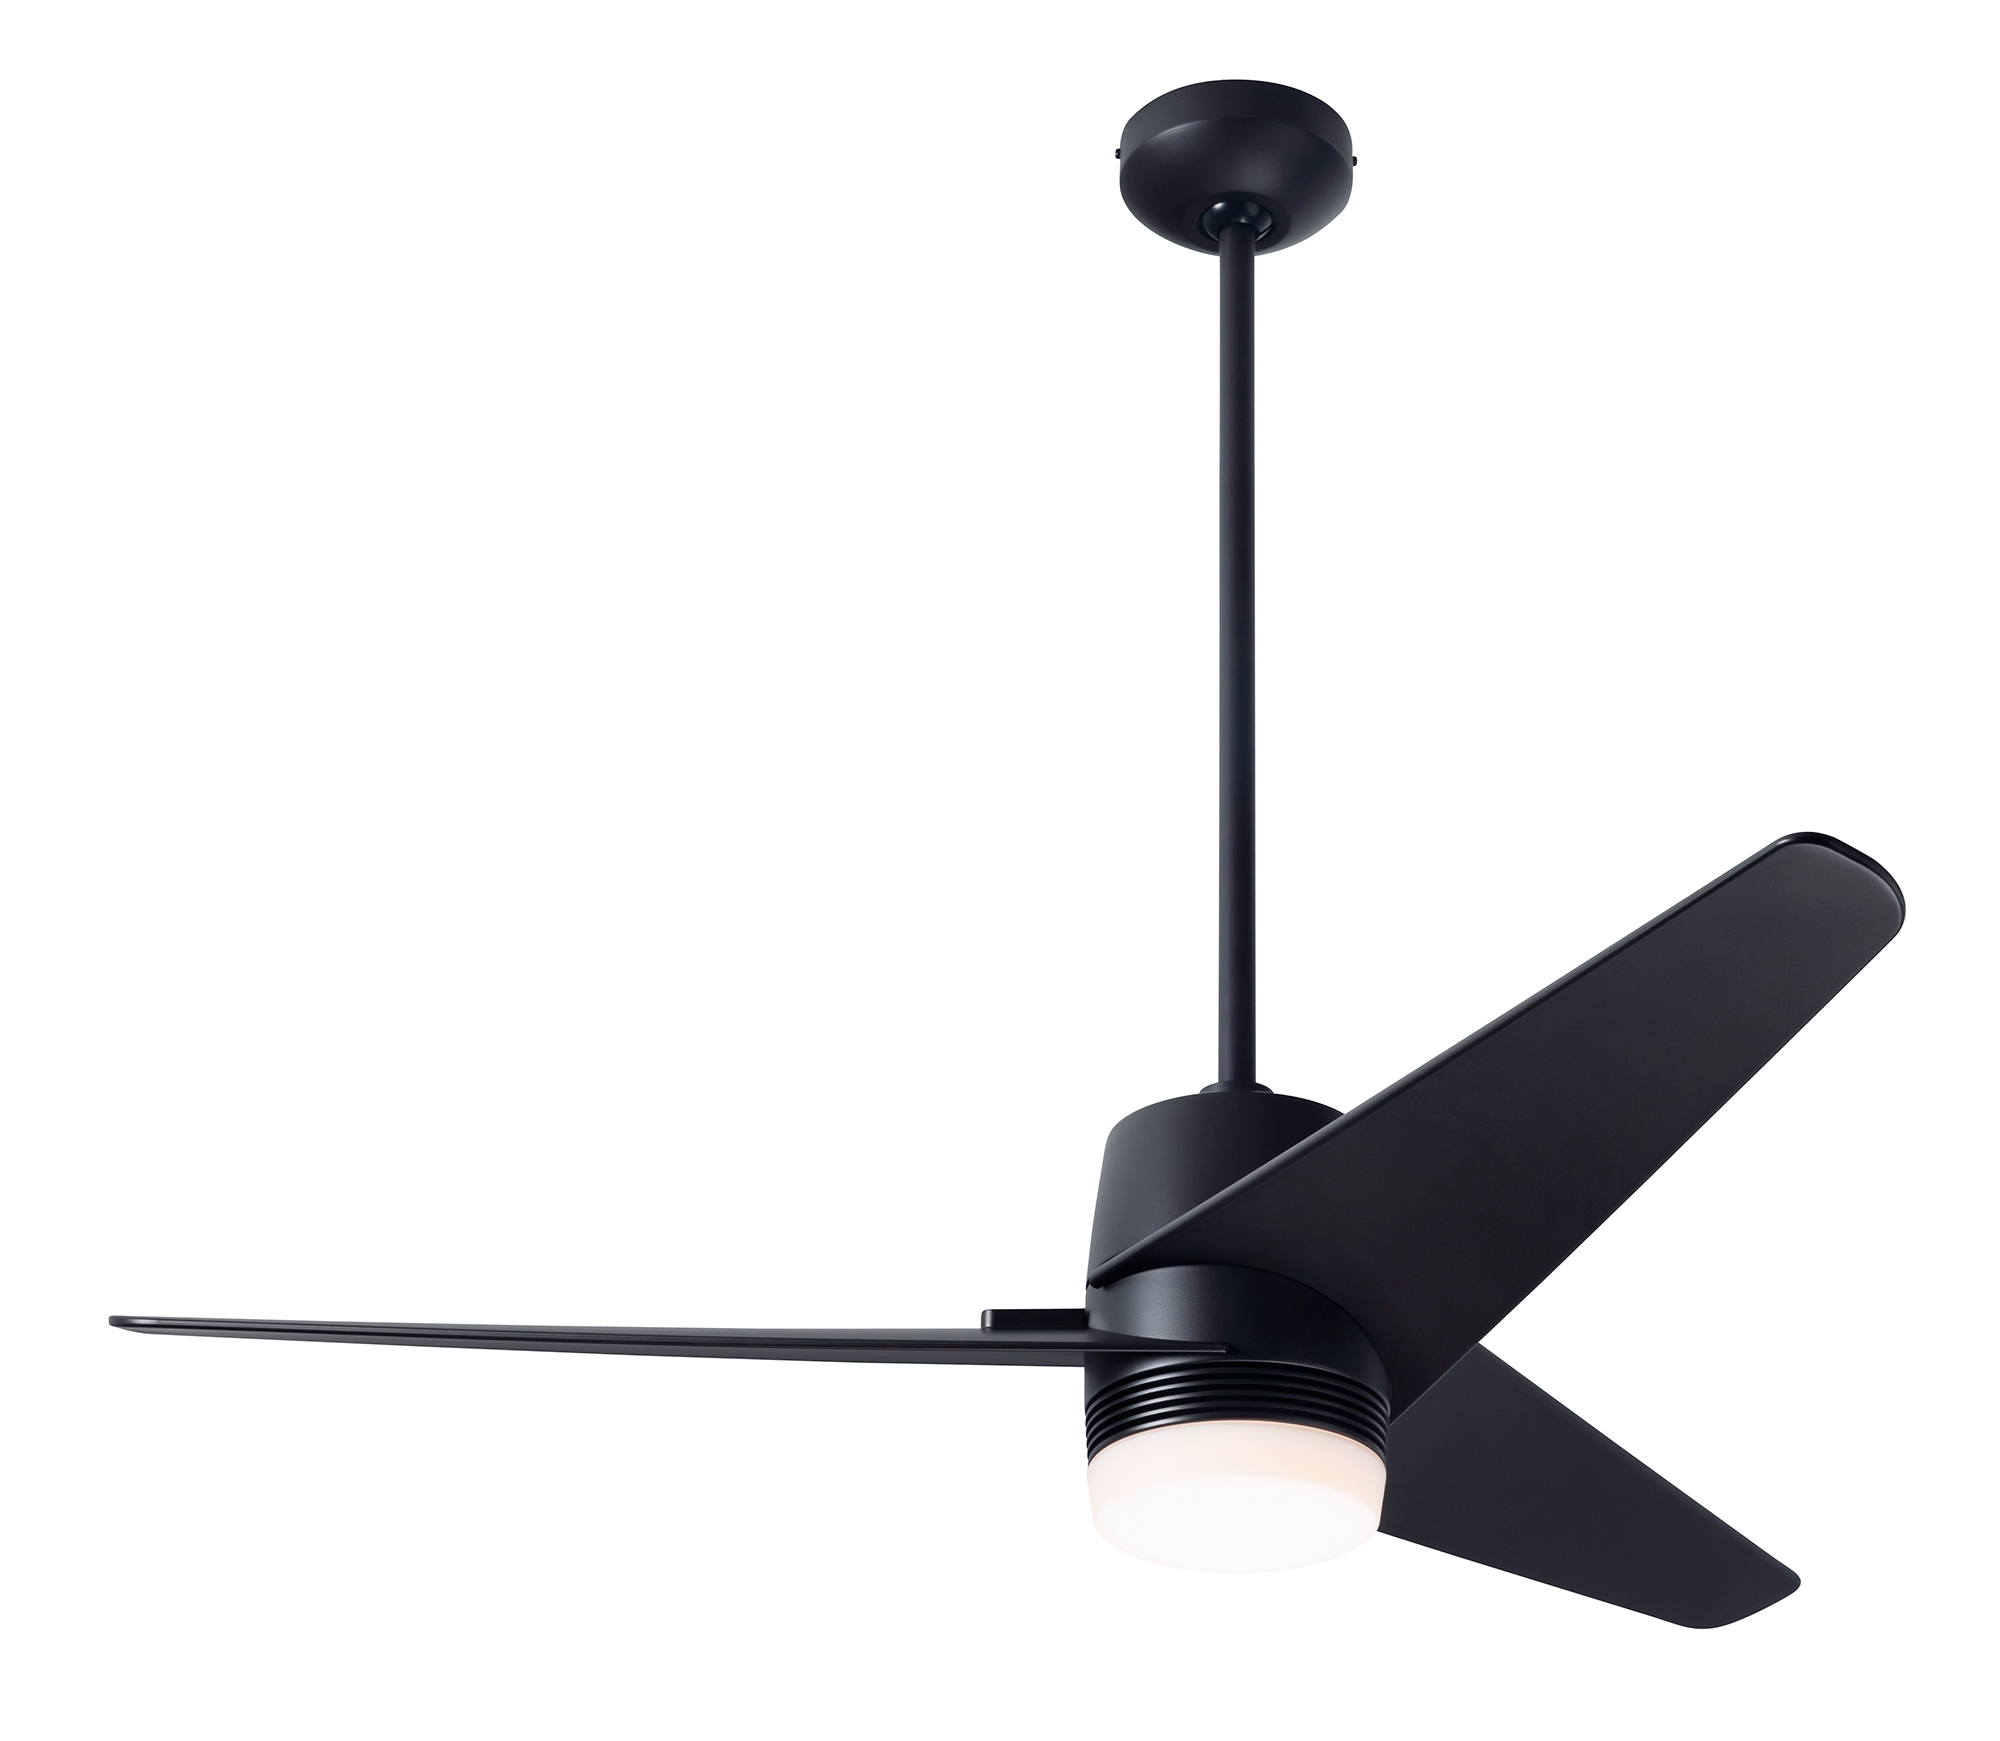 Velo Dc Ceiling Fan With Light By, Dc Ceiling Fan With Light